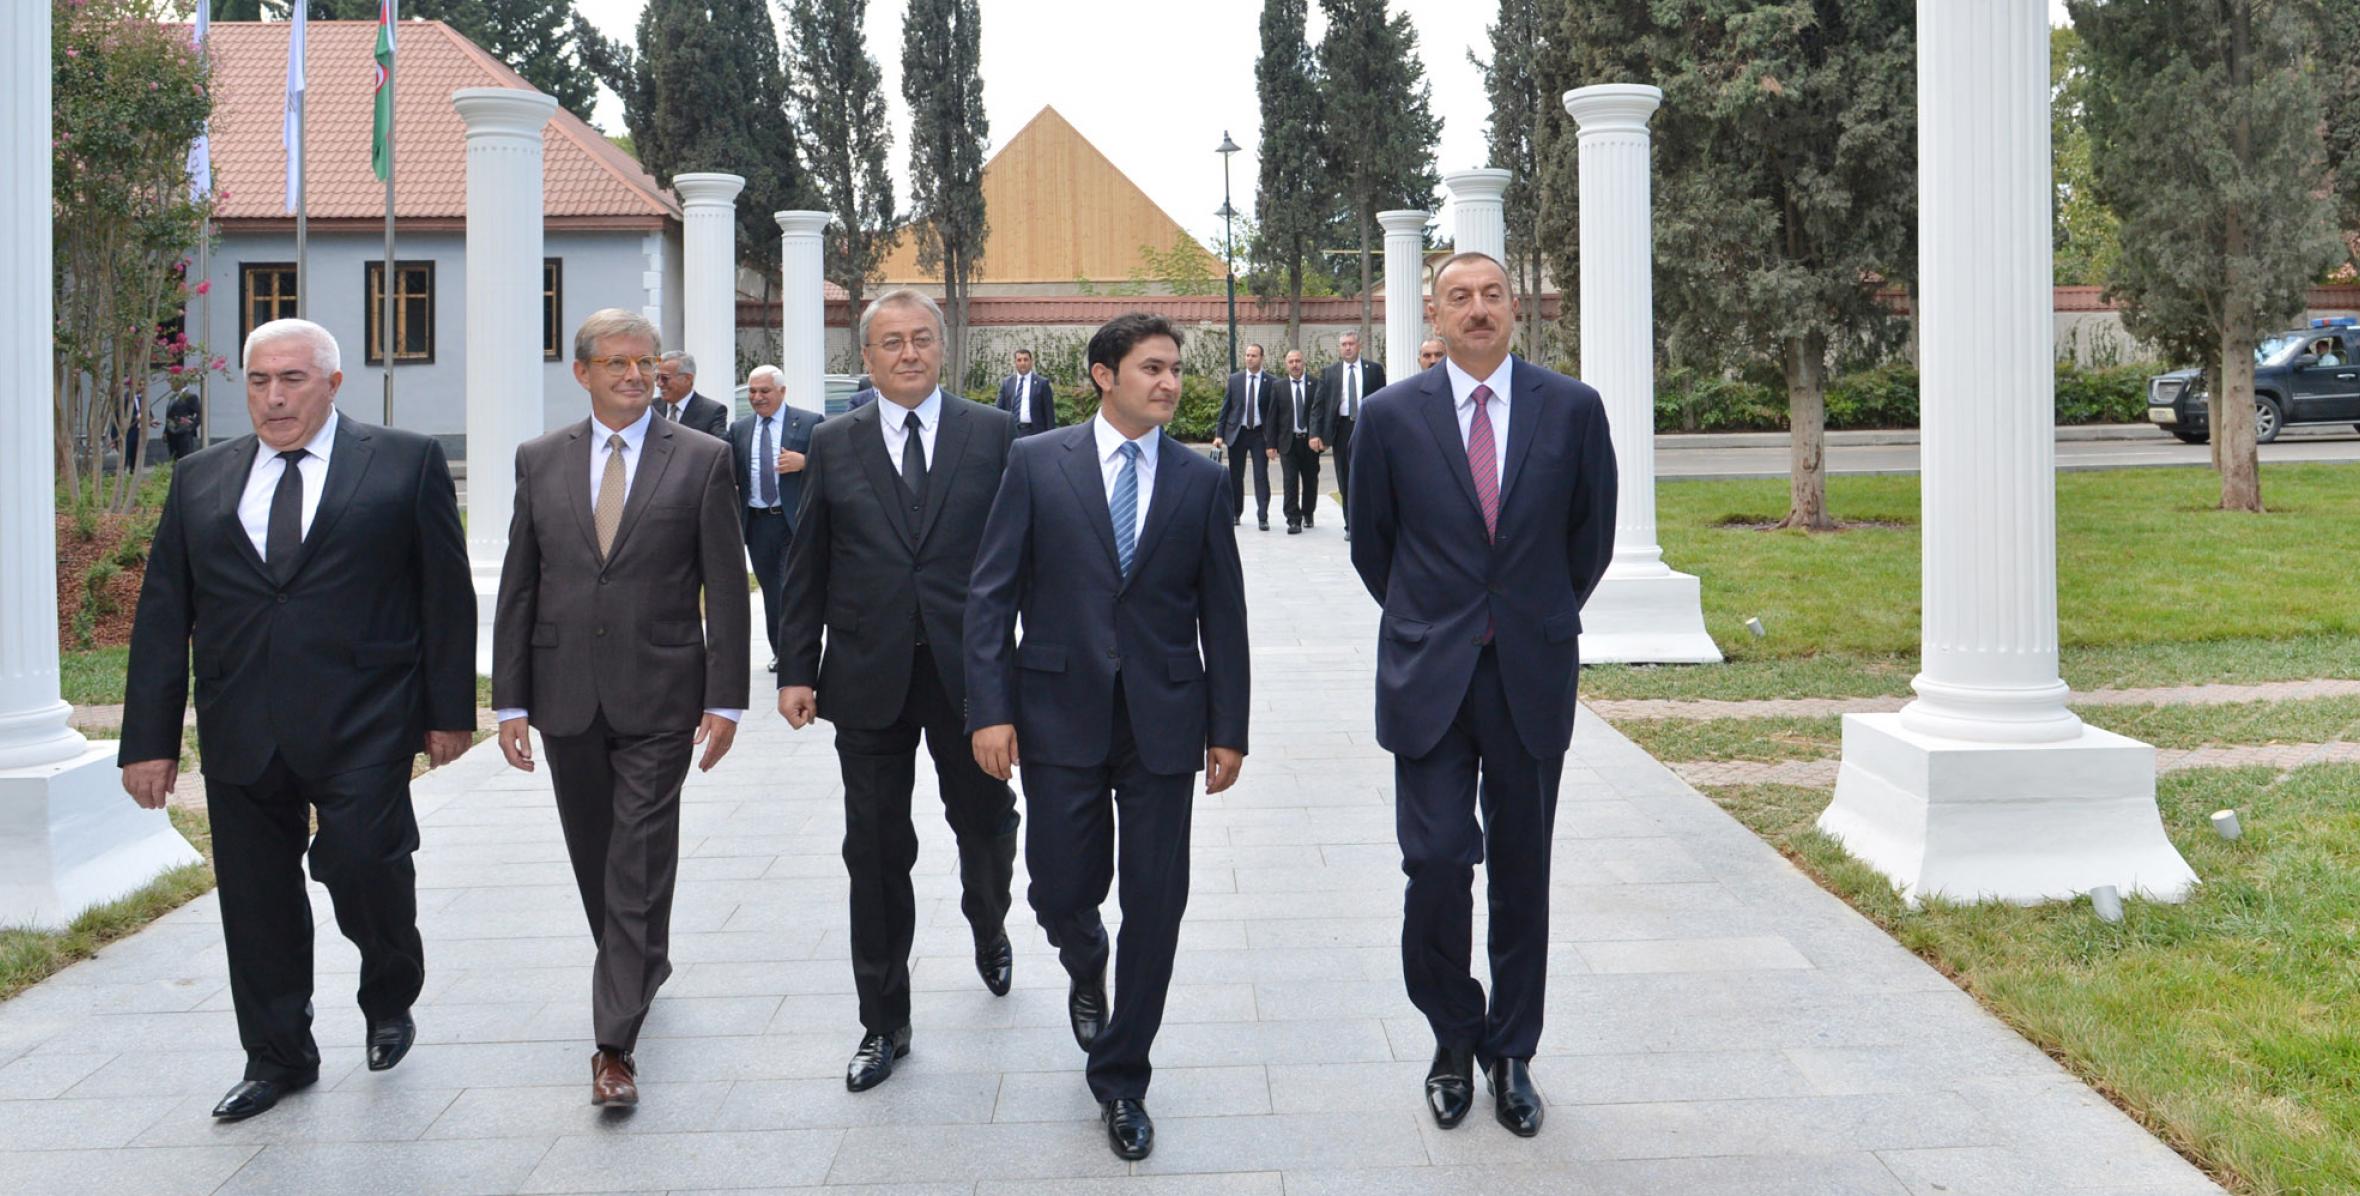 Ilham Aliyev attended the opening of the Excelsior Hotel in Shamkir